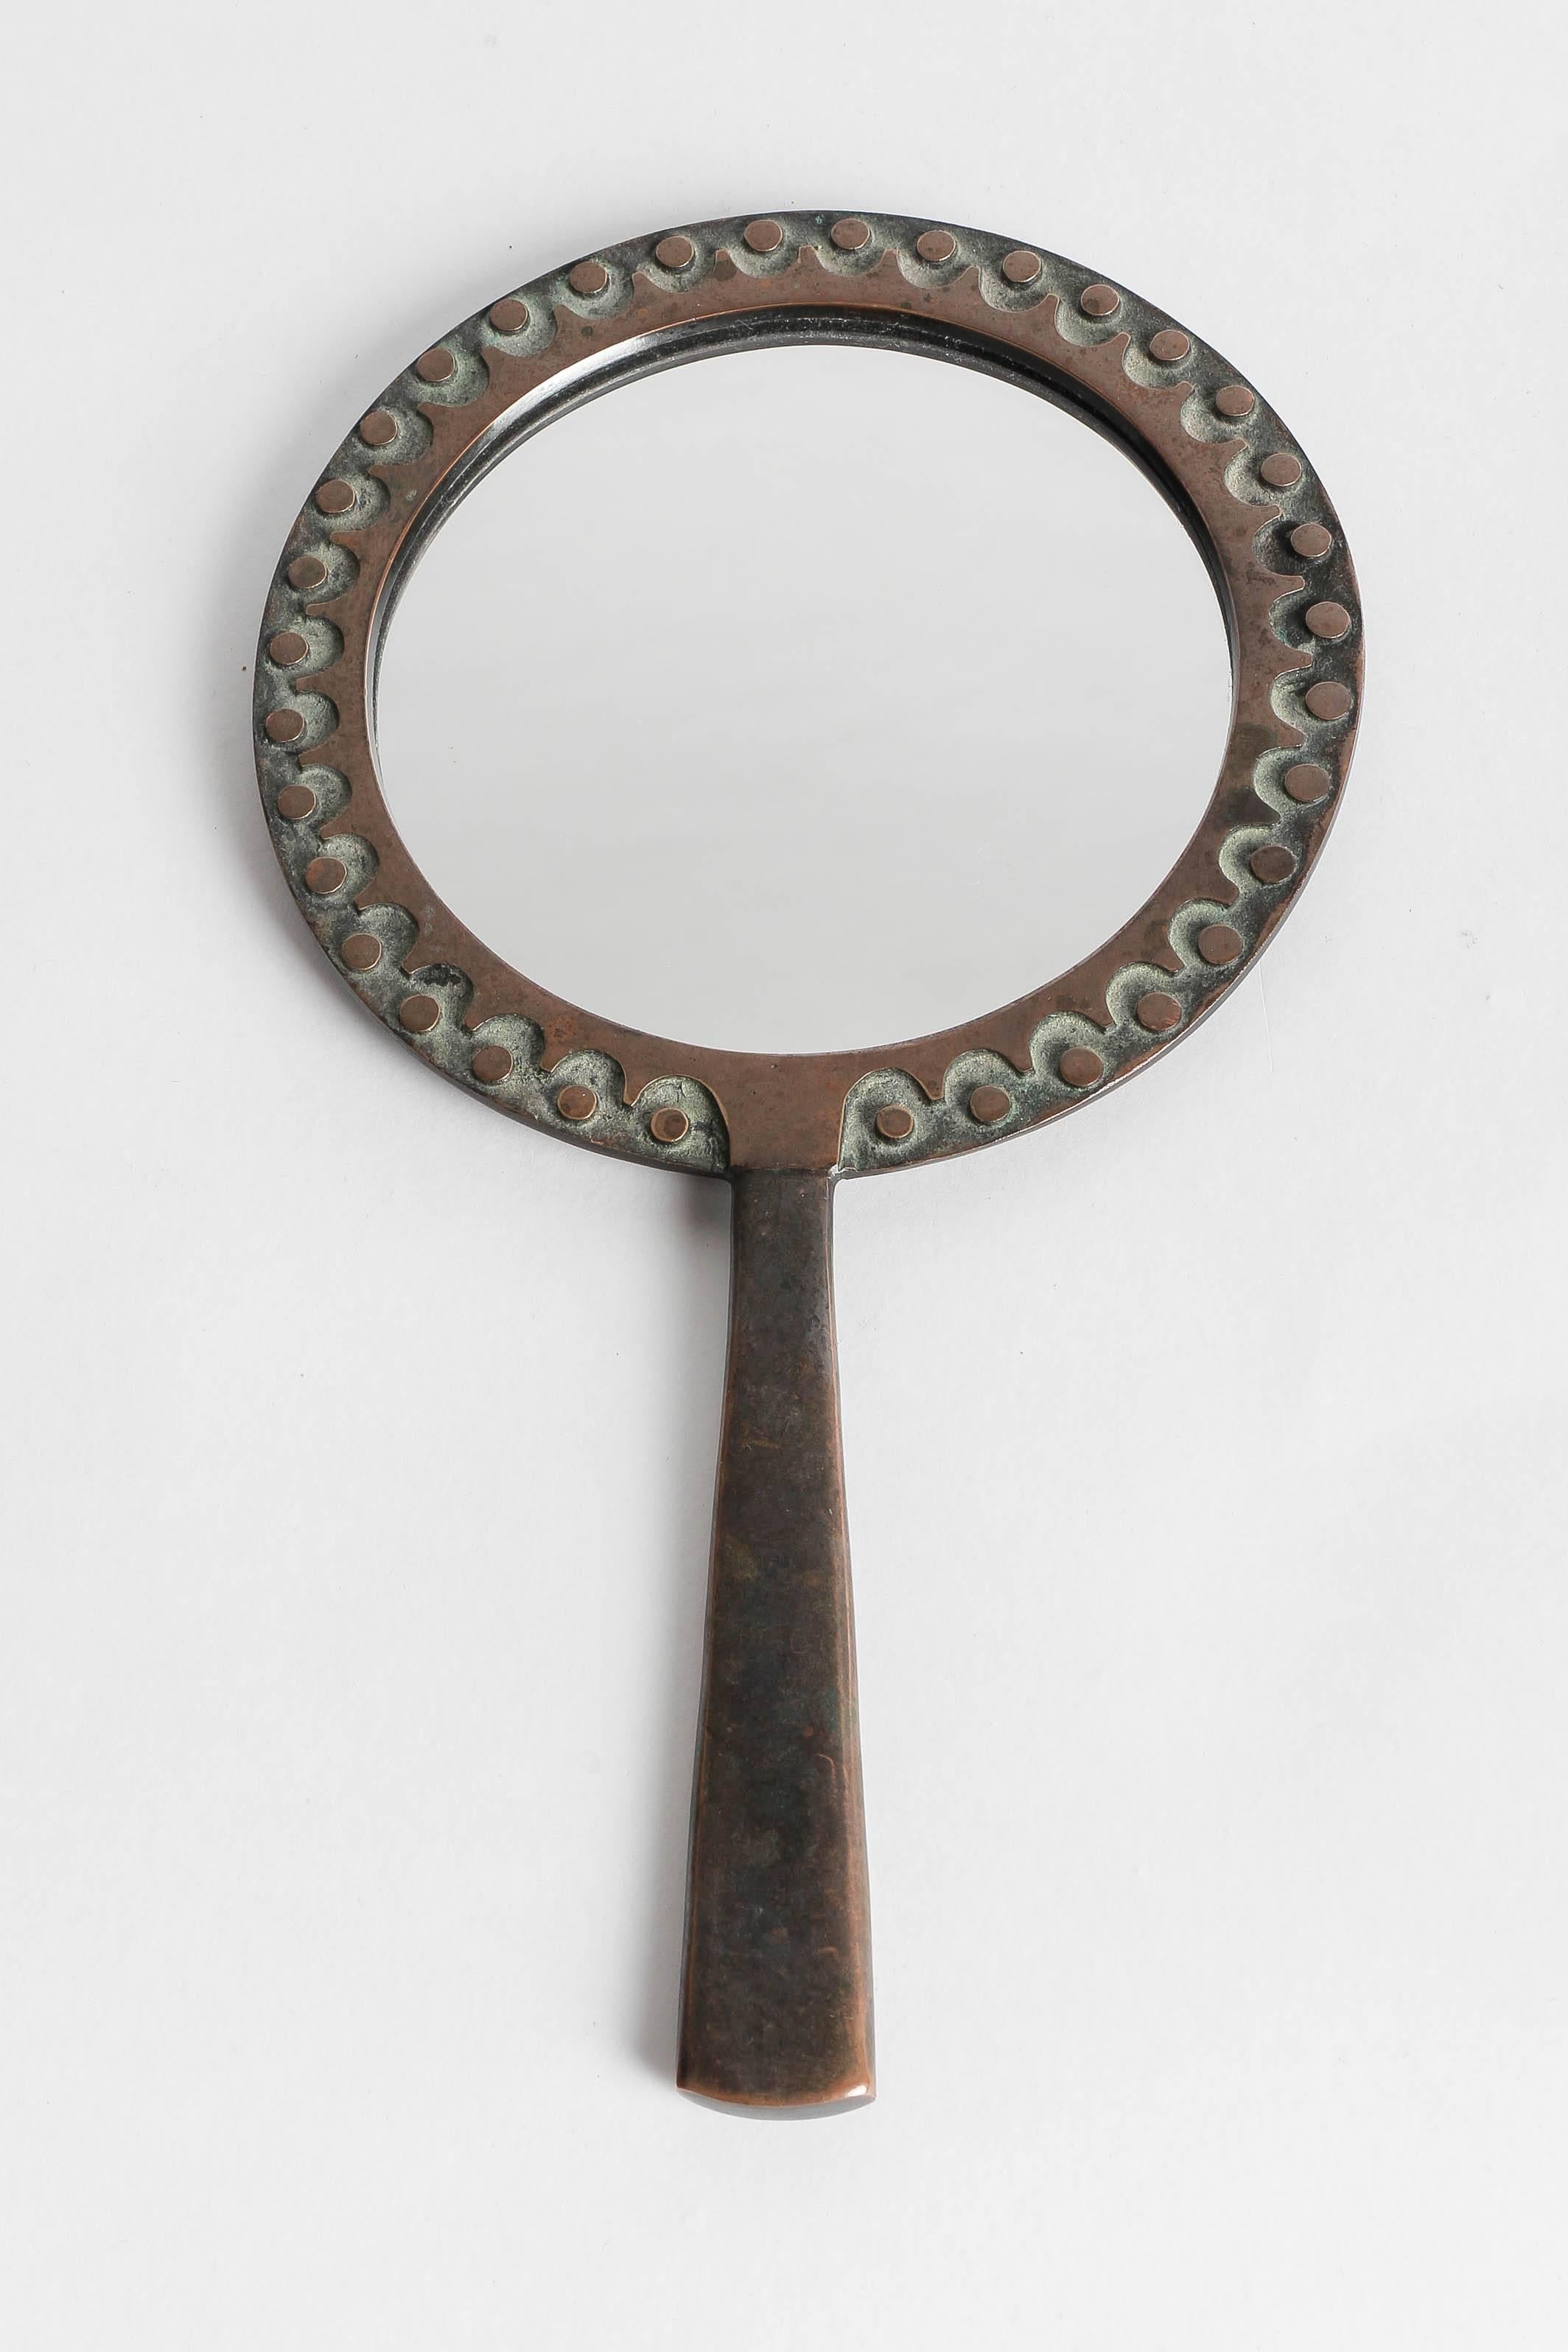 Hand-forged unique piece by the Hungarian sculptor Ottó Kopcsányi in the late 1960s. Hand mirror made of bronze with a lovely pattern, hand-signed on the back by the artist.